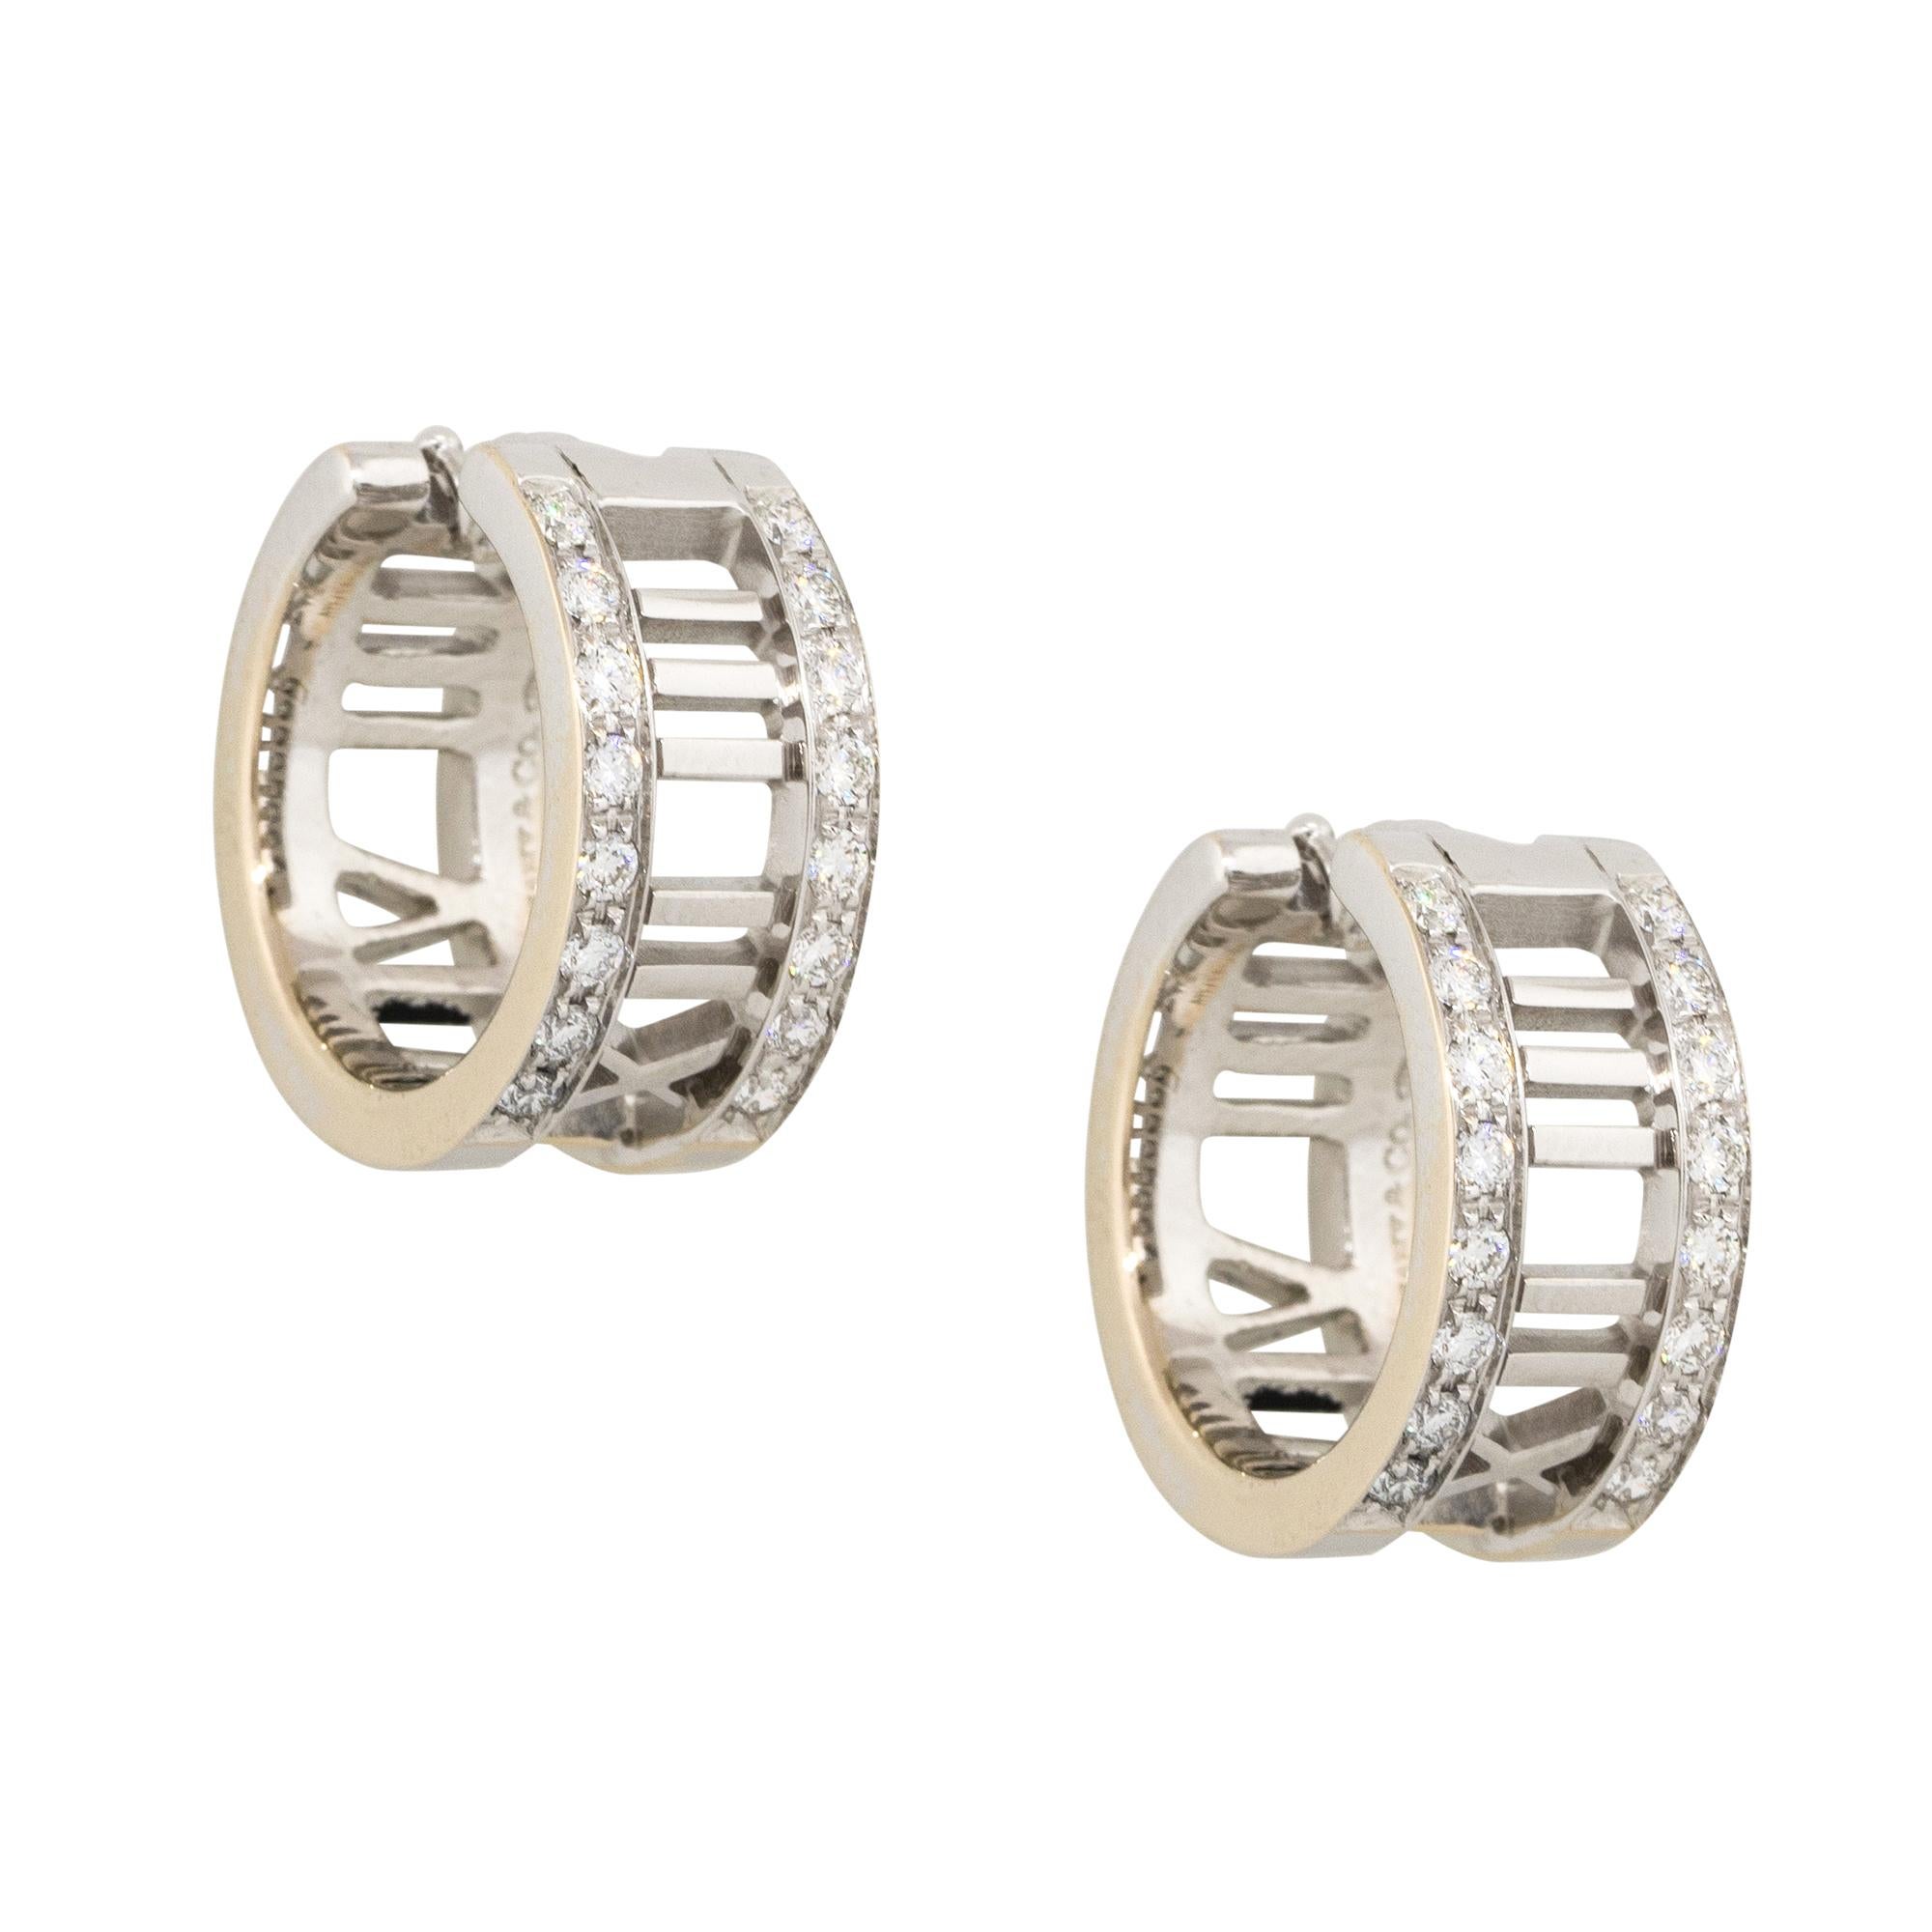 Designer: Tiffany & Co.
Material: 18k White Gold
Style: Diamond Atlas Earrings
Diamond Details: Diamonds are G/H in color and VS in clarity
Earring Measurements: 0.55